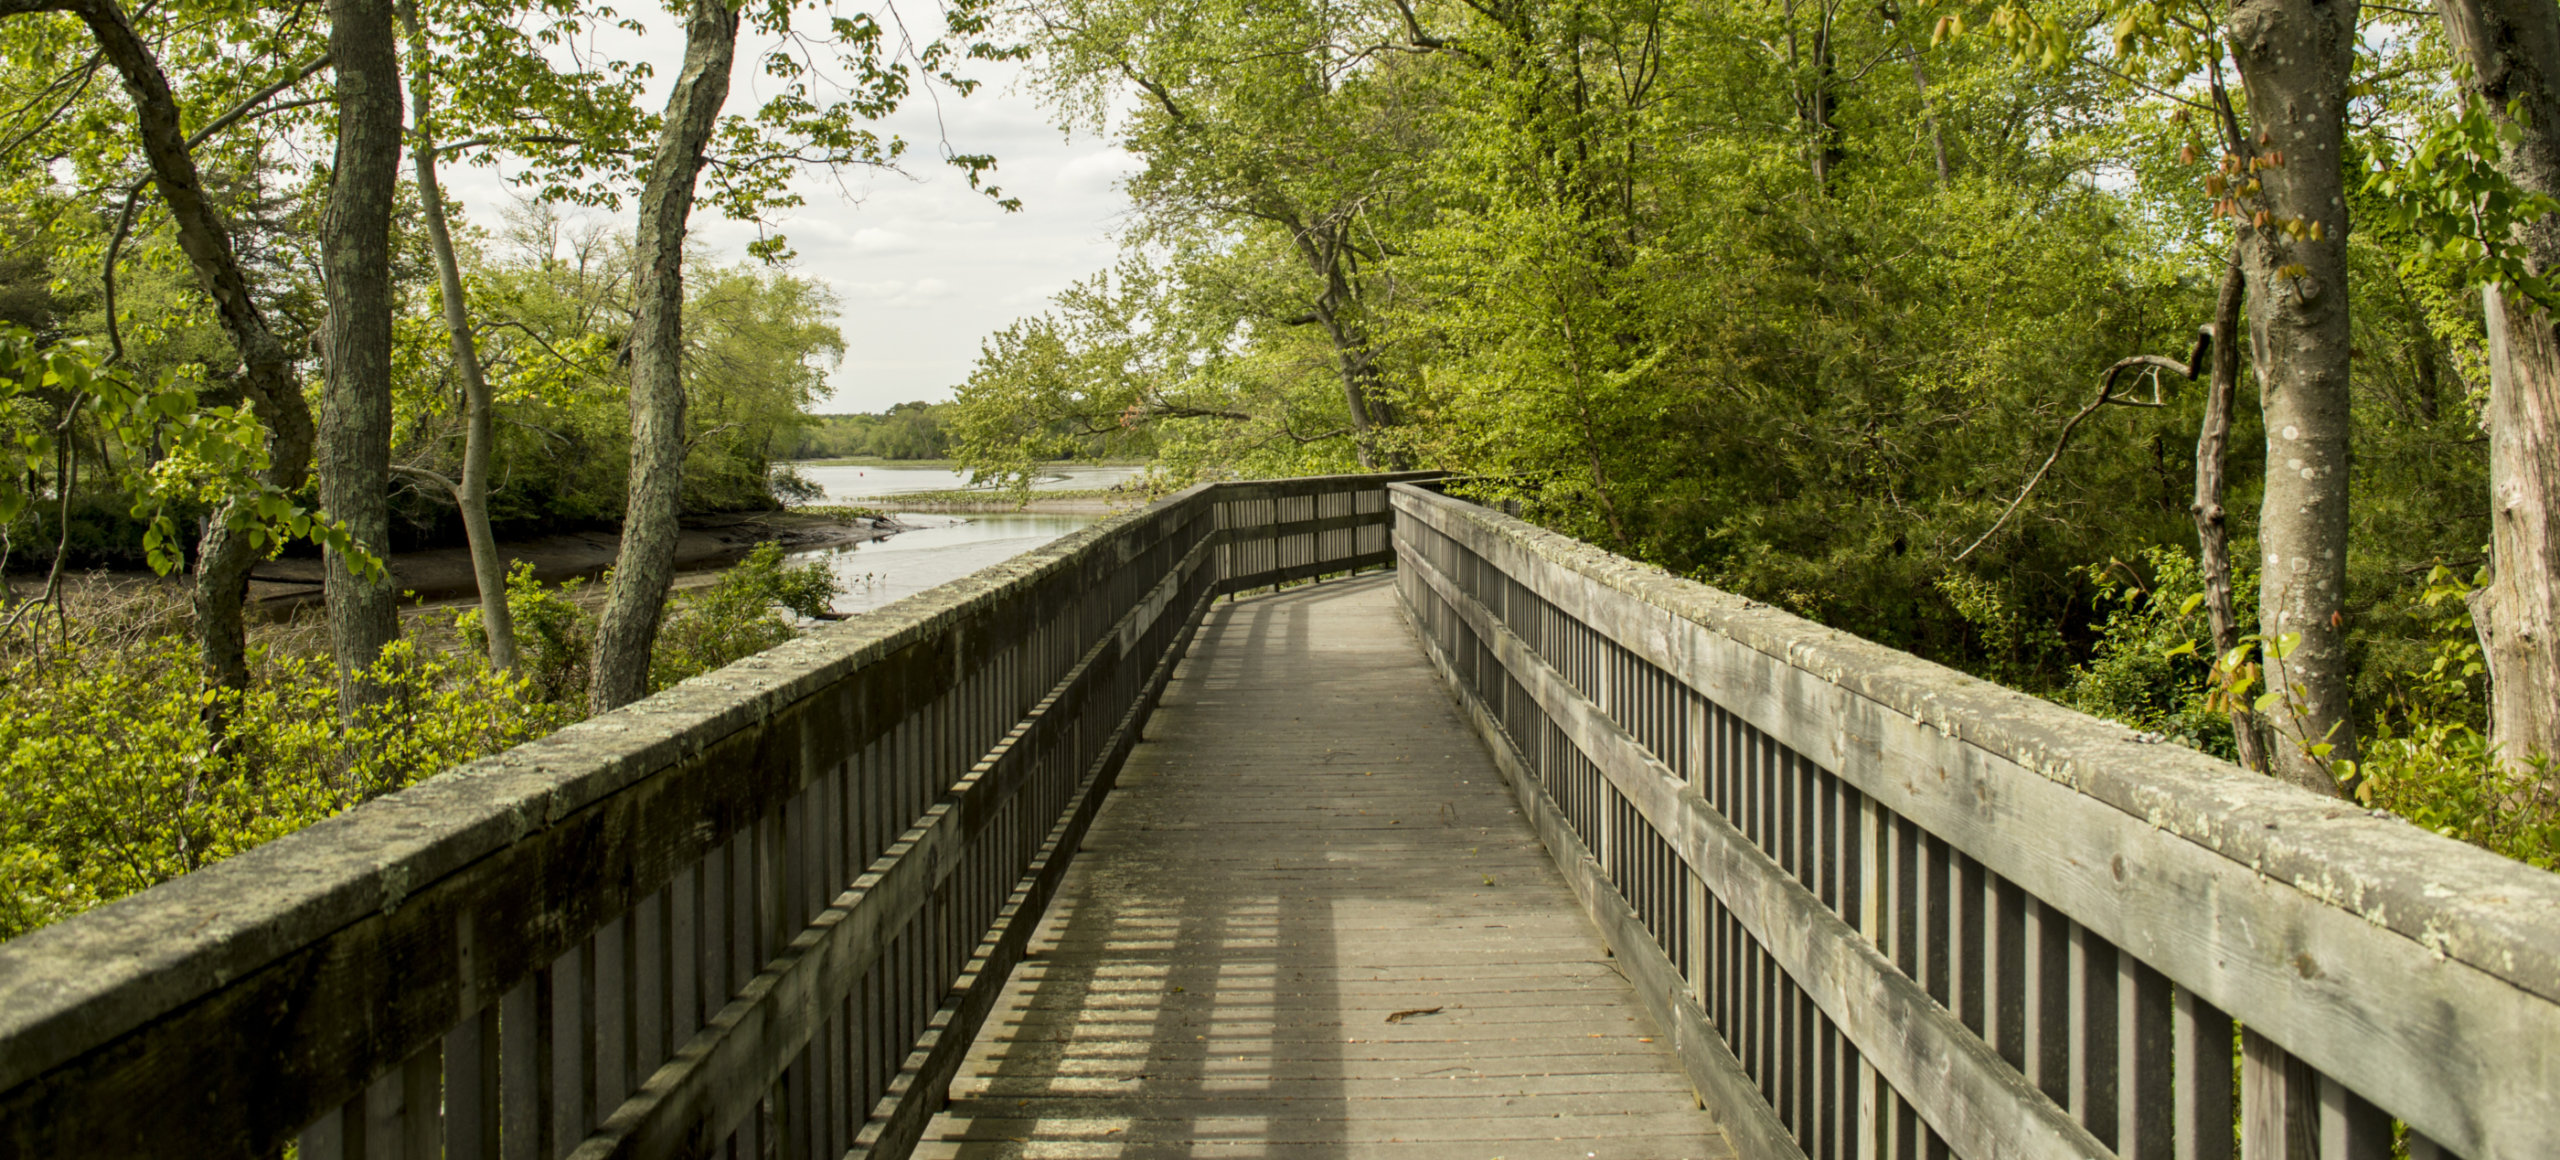 A woodend boardwalk over a marsh leads through a tree covered landscape.